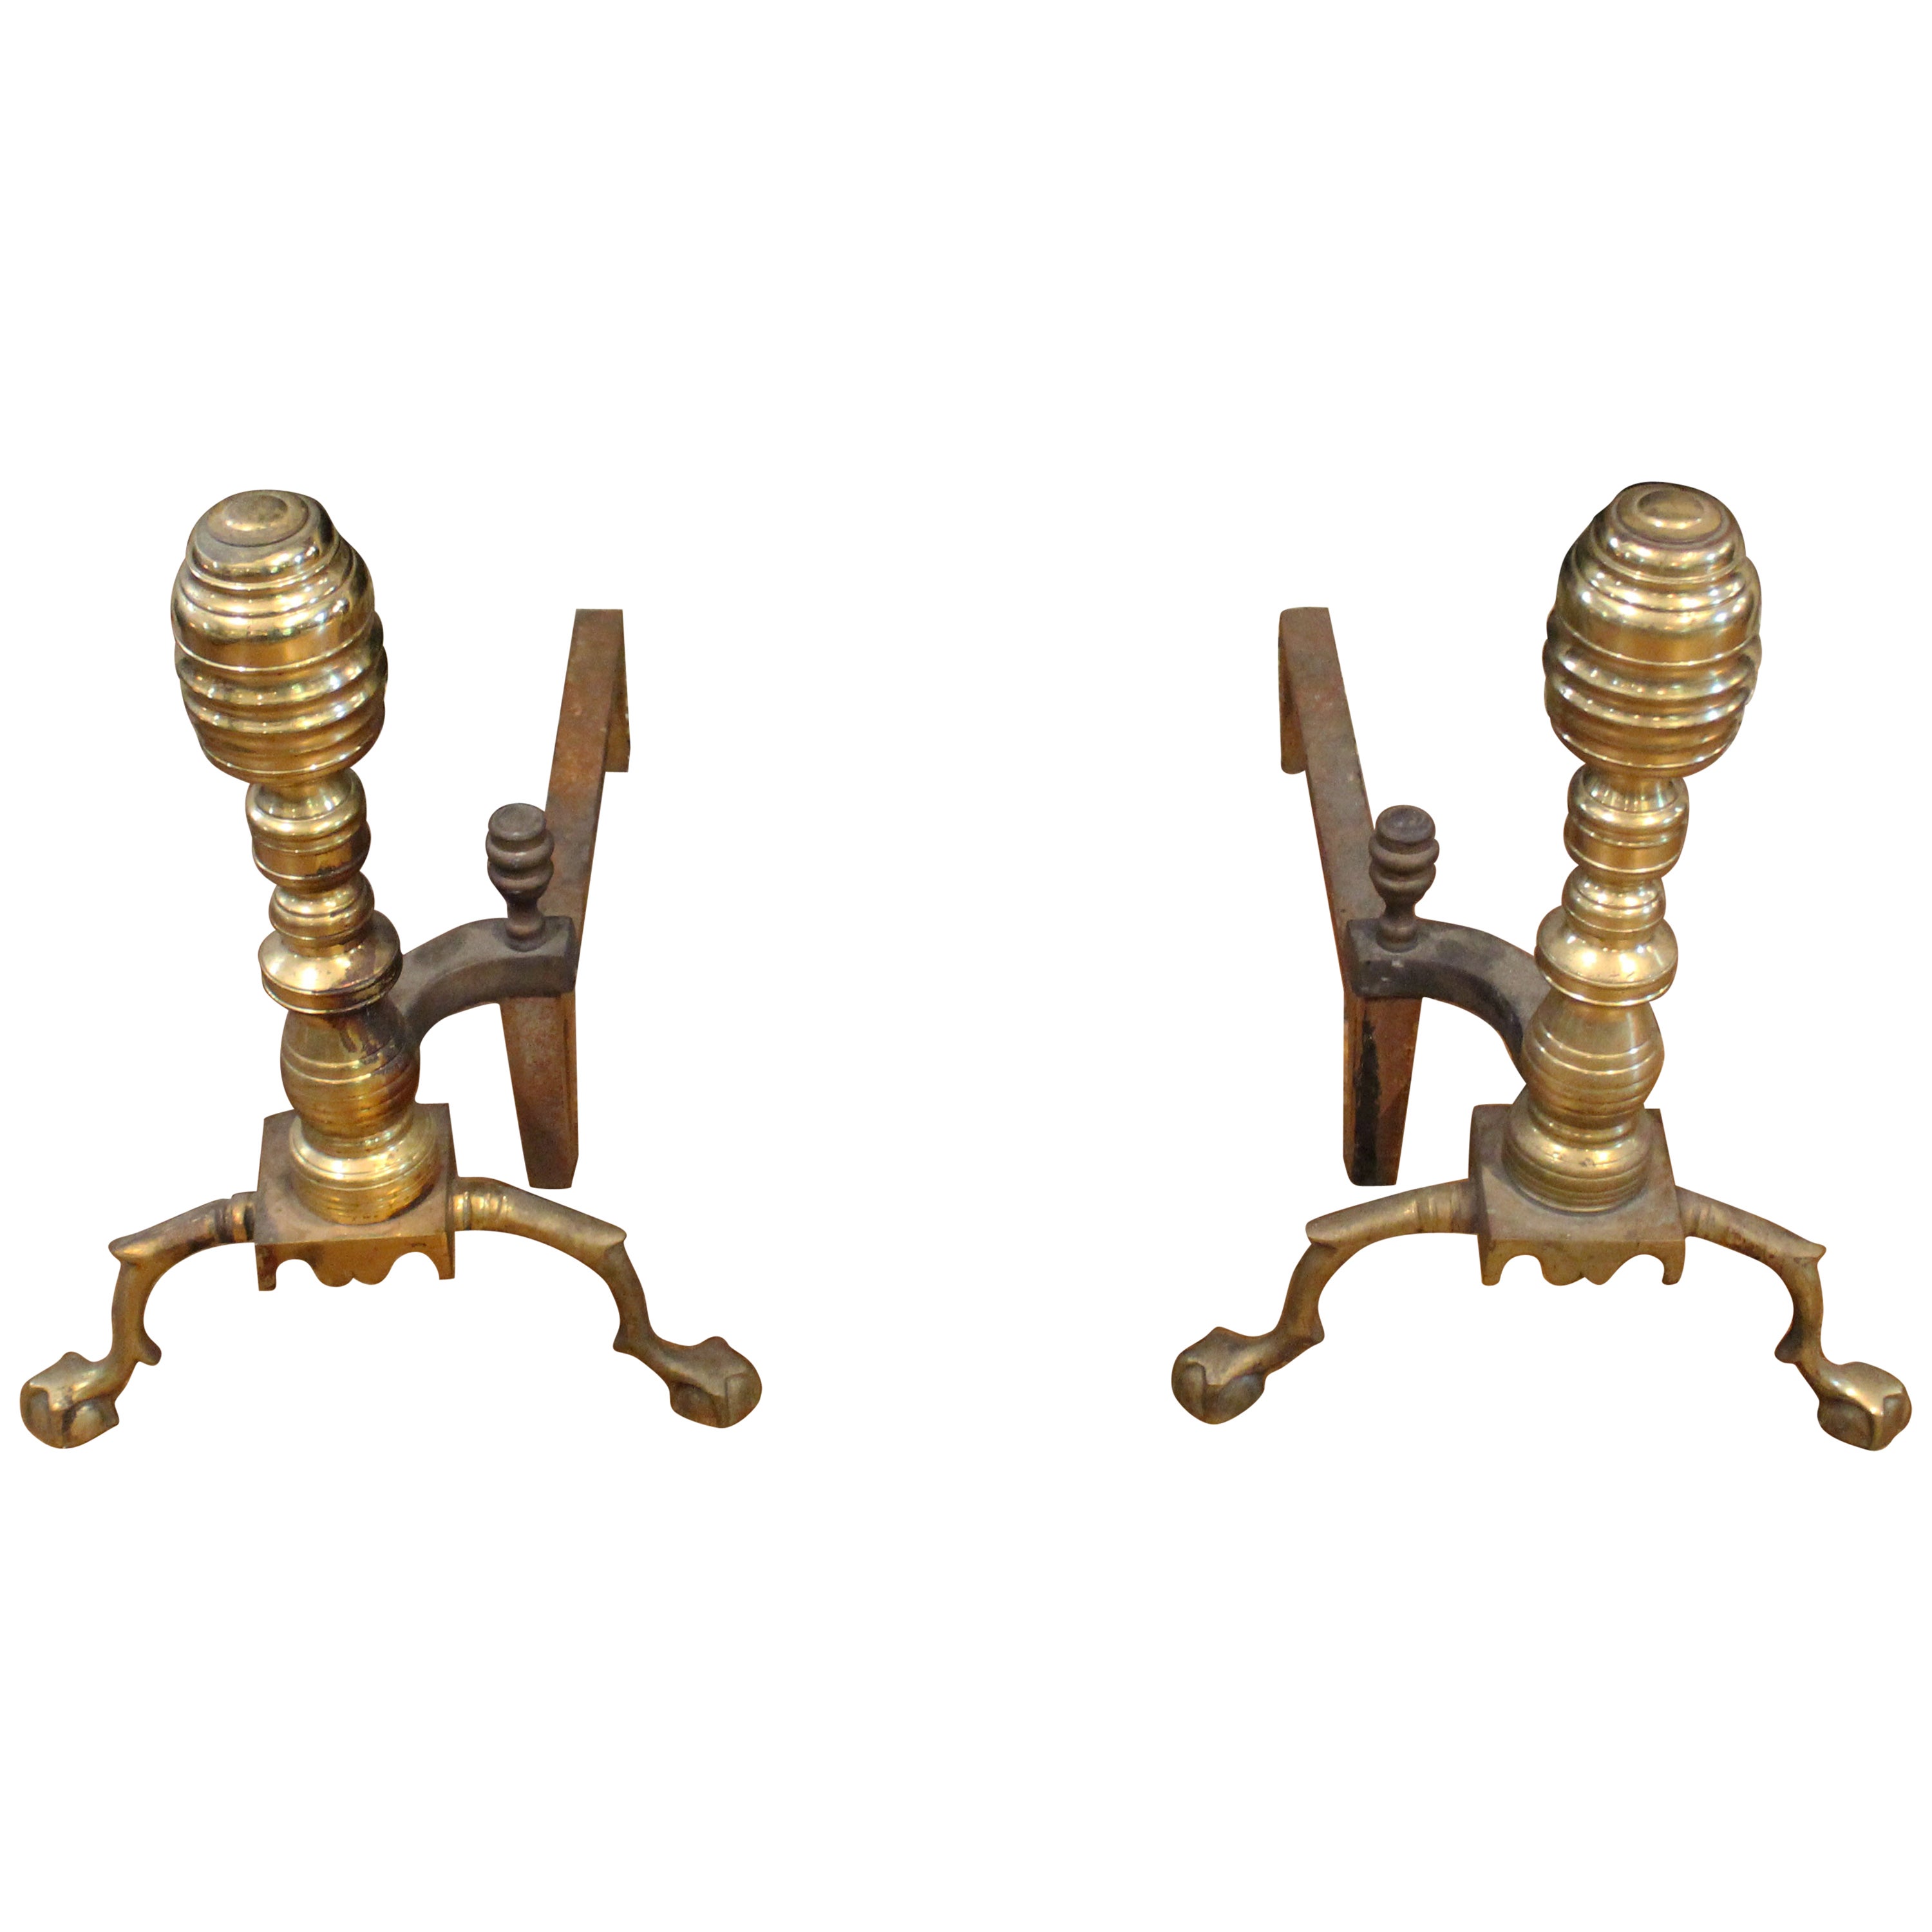 Pair of Mid-20th Brass Andirons in 18th Century Style For Sale